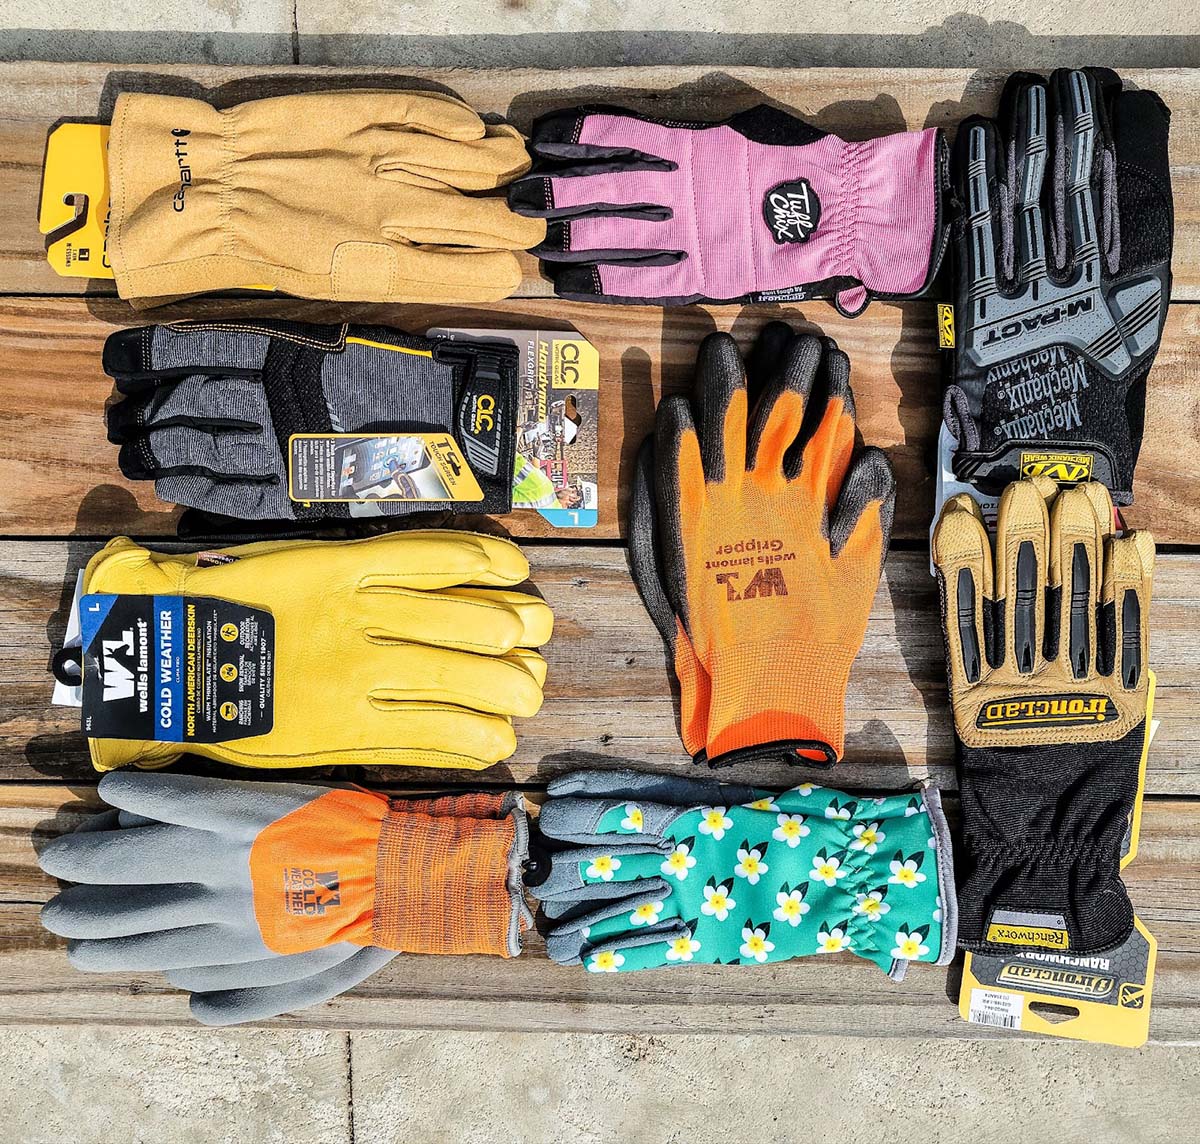 A group of 9 of the best work gloves grouped together on some wooden boards before undergoing testing.